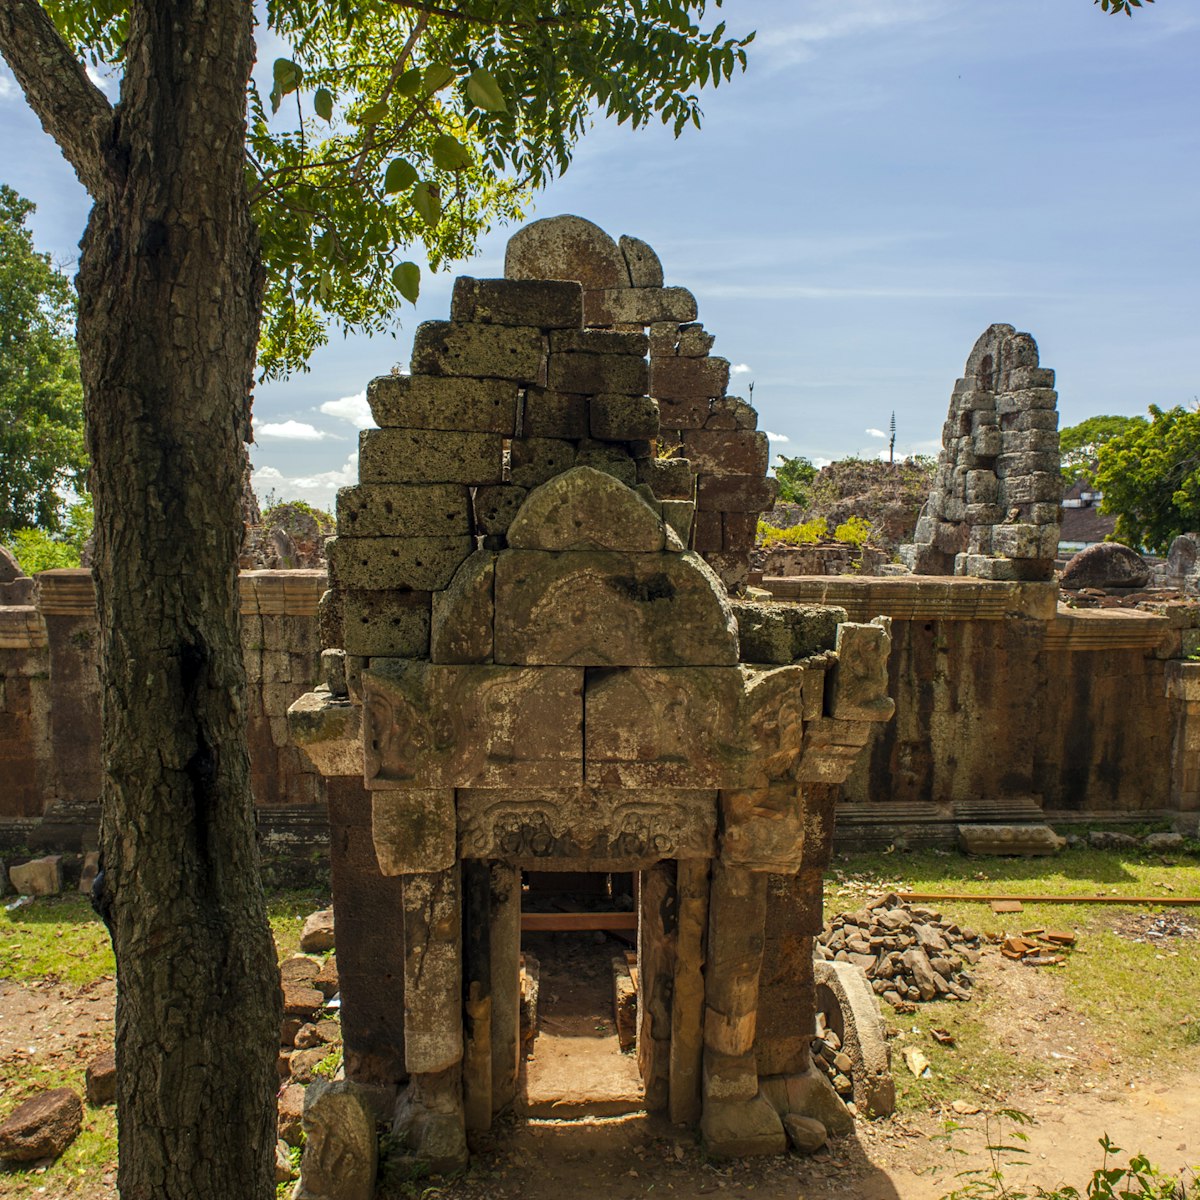 PHNOM CHISOR, TAKEO, CAMBODIA - 2014/08/20: The ruins at Phnom Chisor, a temple built in the 11th century by the Khmer Empire king Suryavarman. A  practitioner of Brahmanism, Suryavarman dedicated the temple to the Hindu gods Shiva and Vishnu. The original name of the temple was Sri Suryaparvata. Hundreds of miles from the temples of Angkor Wat, the temple is little visited and close to falling down; temporary measures are being taken to stabilize parts of it with wooden and metal braces. (Photo by Leisa Tyler/LightRocket via Getty Images)